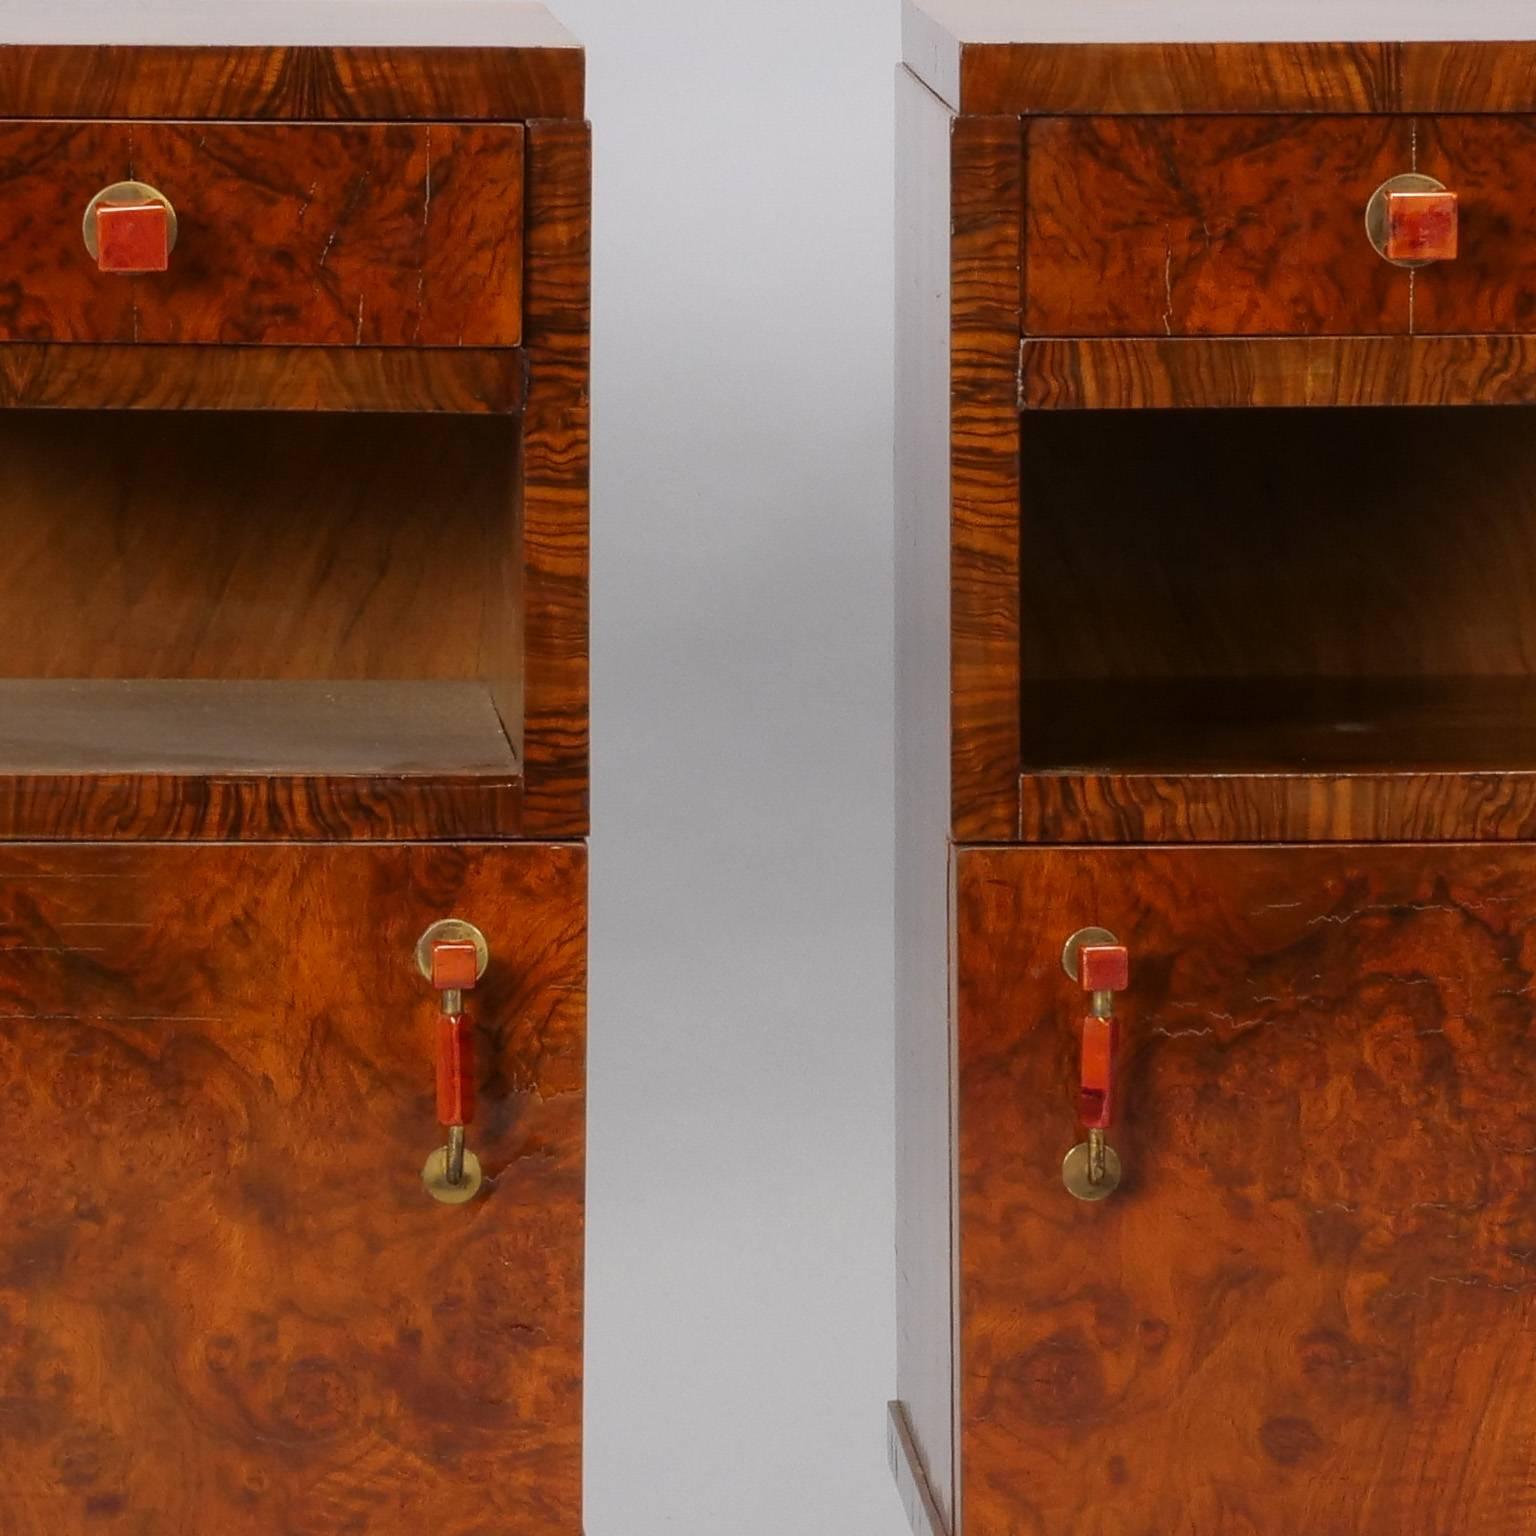 Found in Italy, this pair of Deco era bedside cabinets date from the 1930s and have a dramatic burl wood veneer with one small drawer suspended over an open shelf and lower cabinet with hinged door. Original bakelite hardware. Sold and priced as a